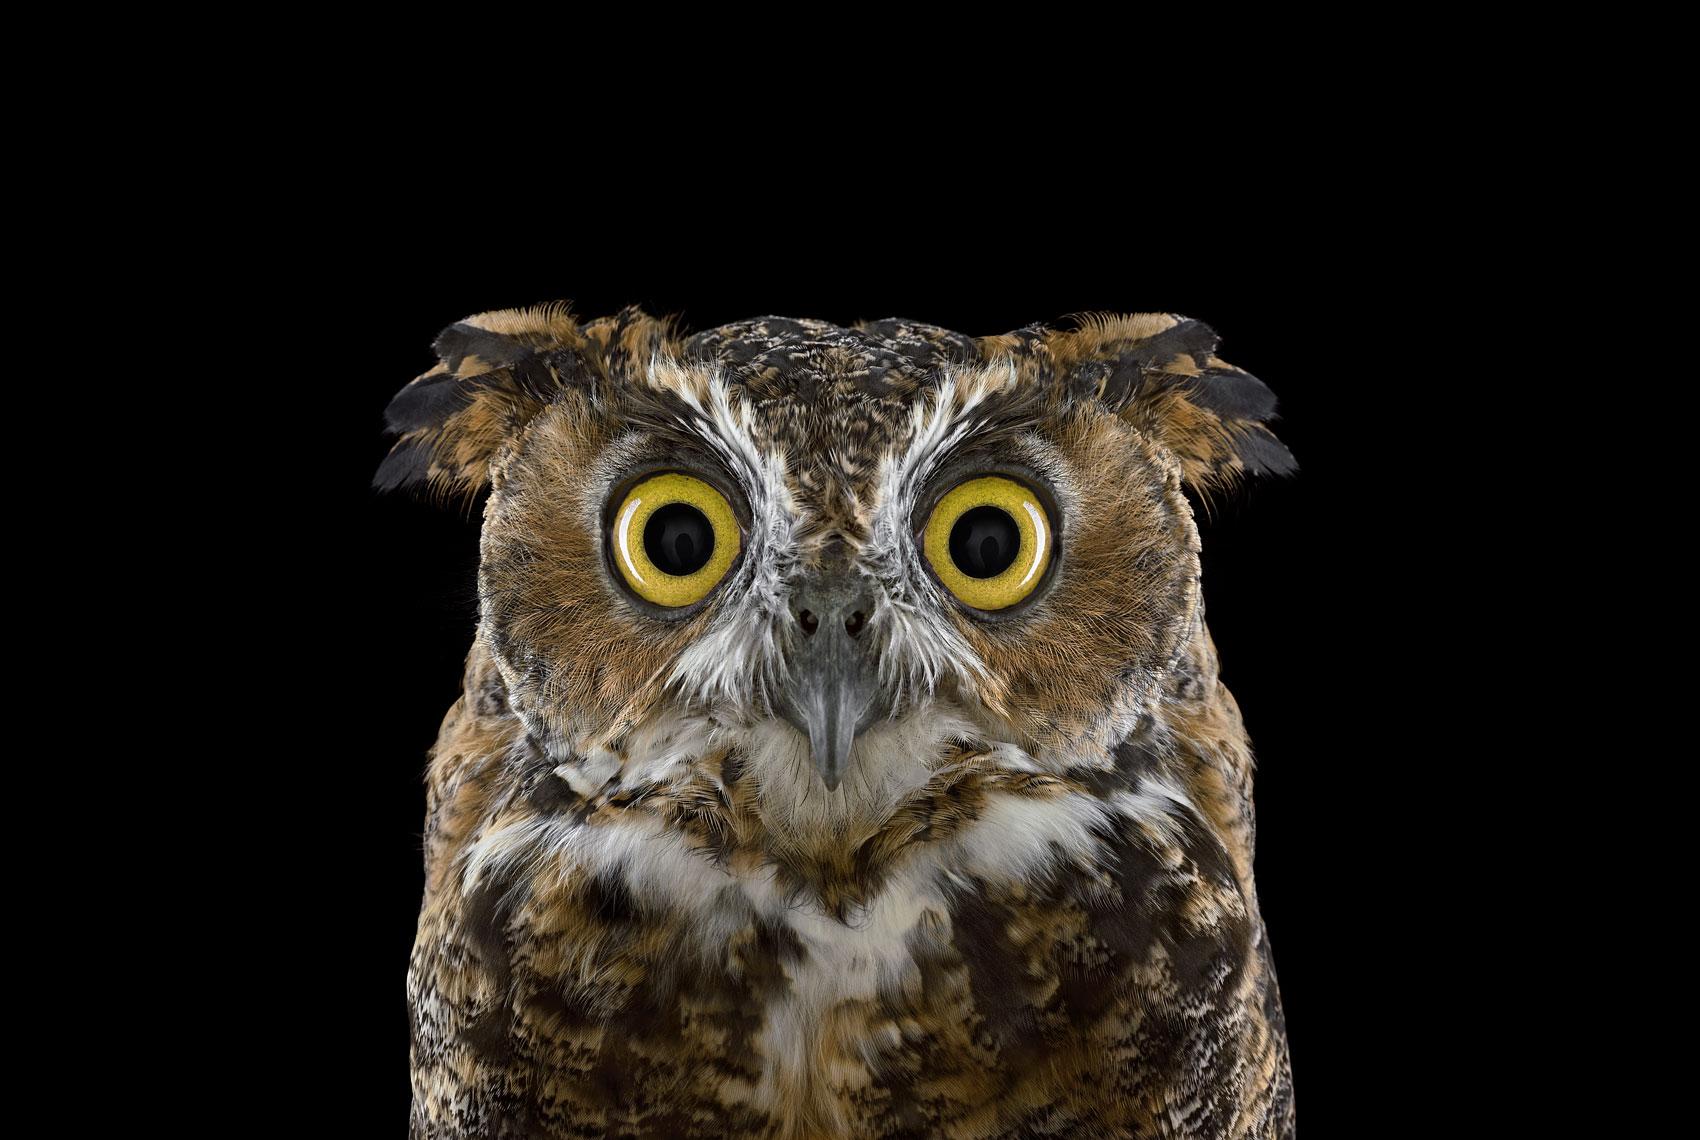 'Great Horned Owl #3, Espanola, NM, 2011' is a limited-edition photograph by contemporary artist Brad Wilson from the ‘Affinity’ series which features studio portraits of wild animals. 

This photograph is sold unframed as a print only. It is